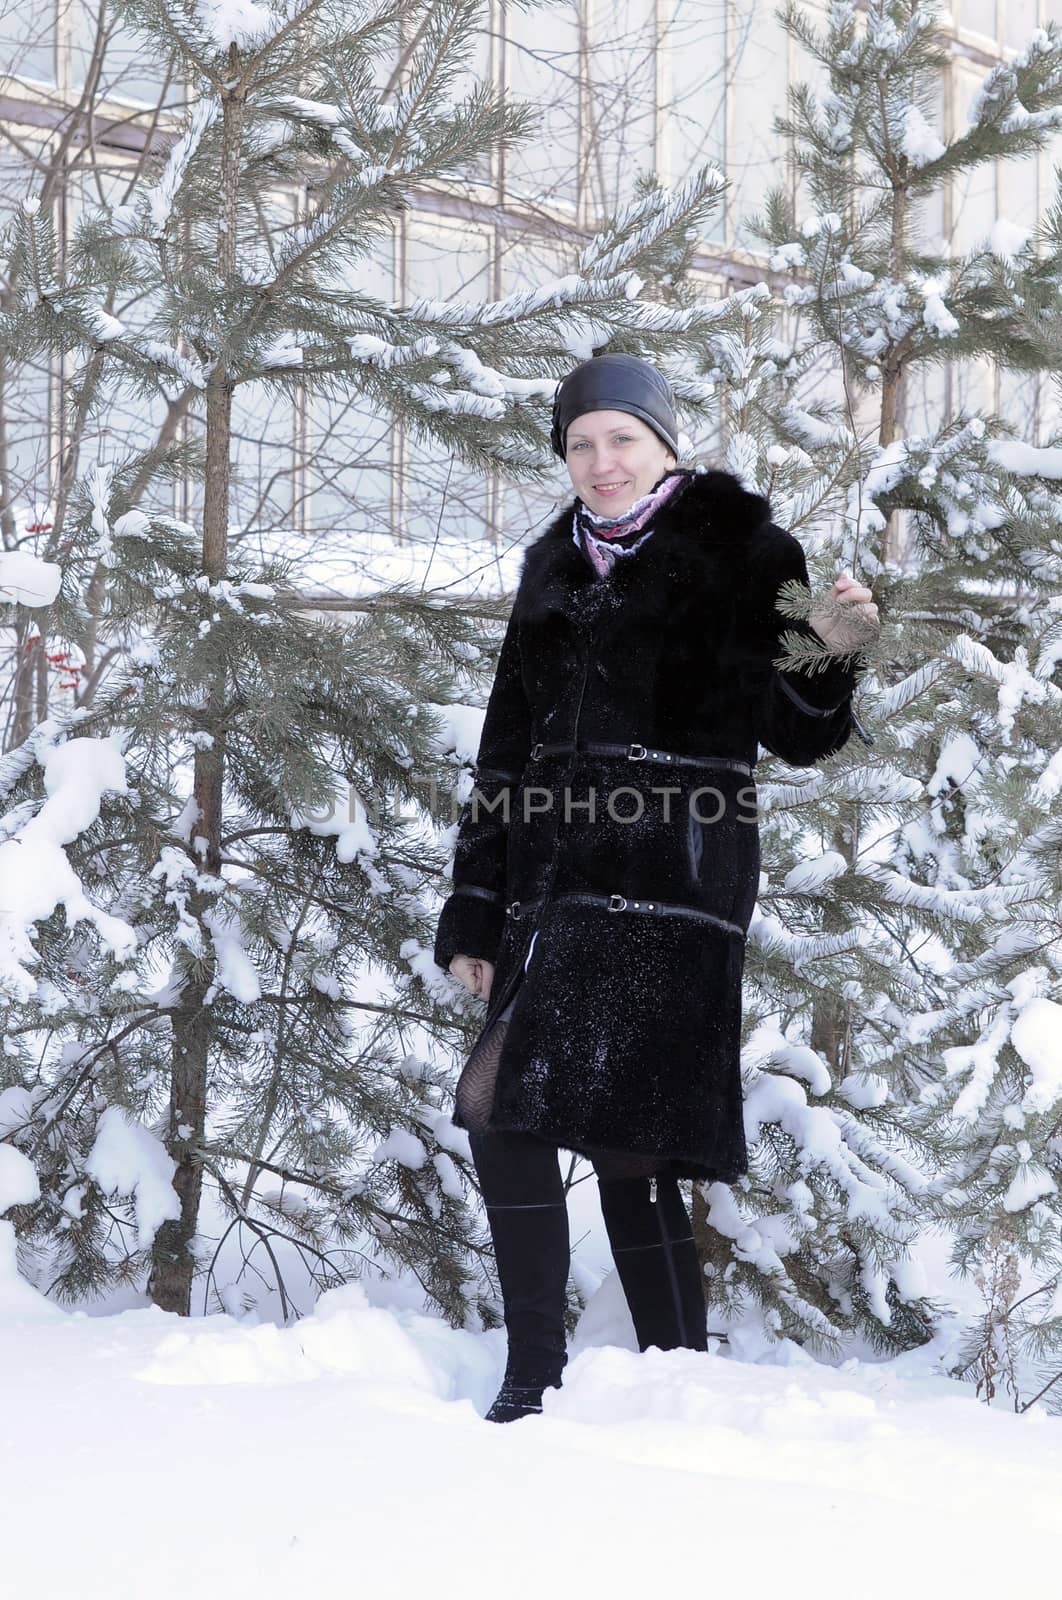 The cheerful woman in a black fur coat costs at snow-covered pines in park